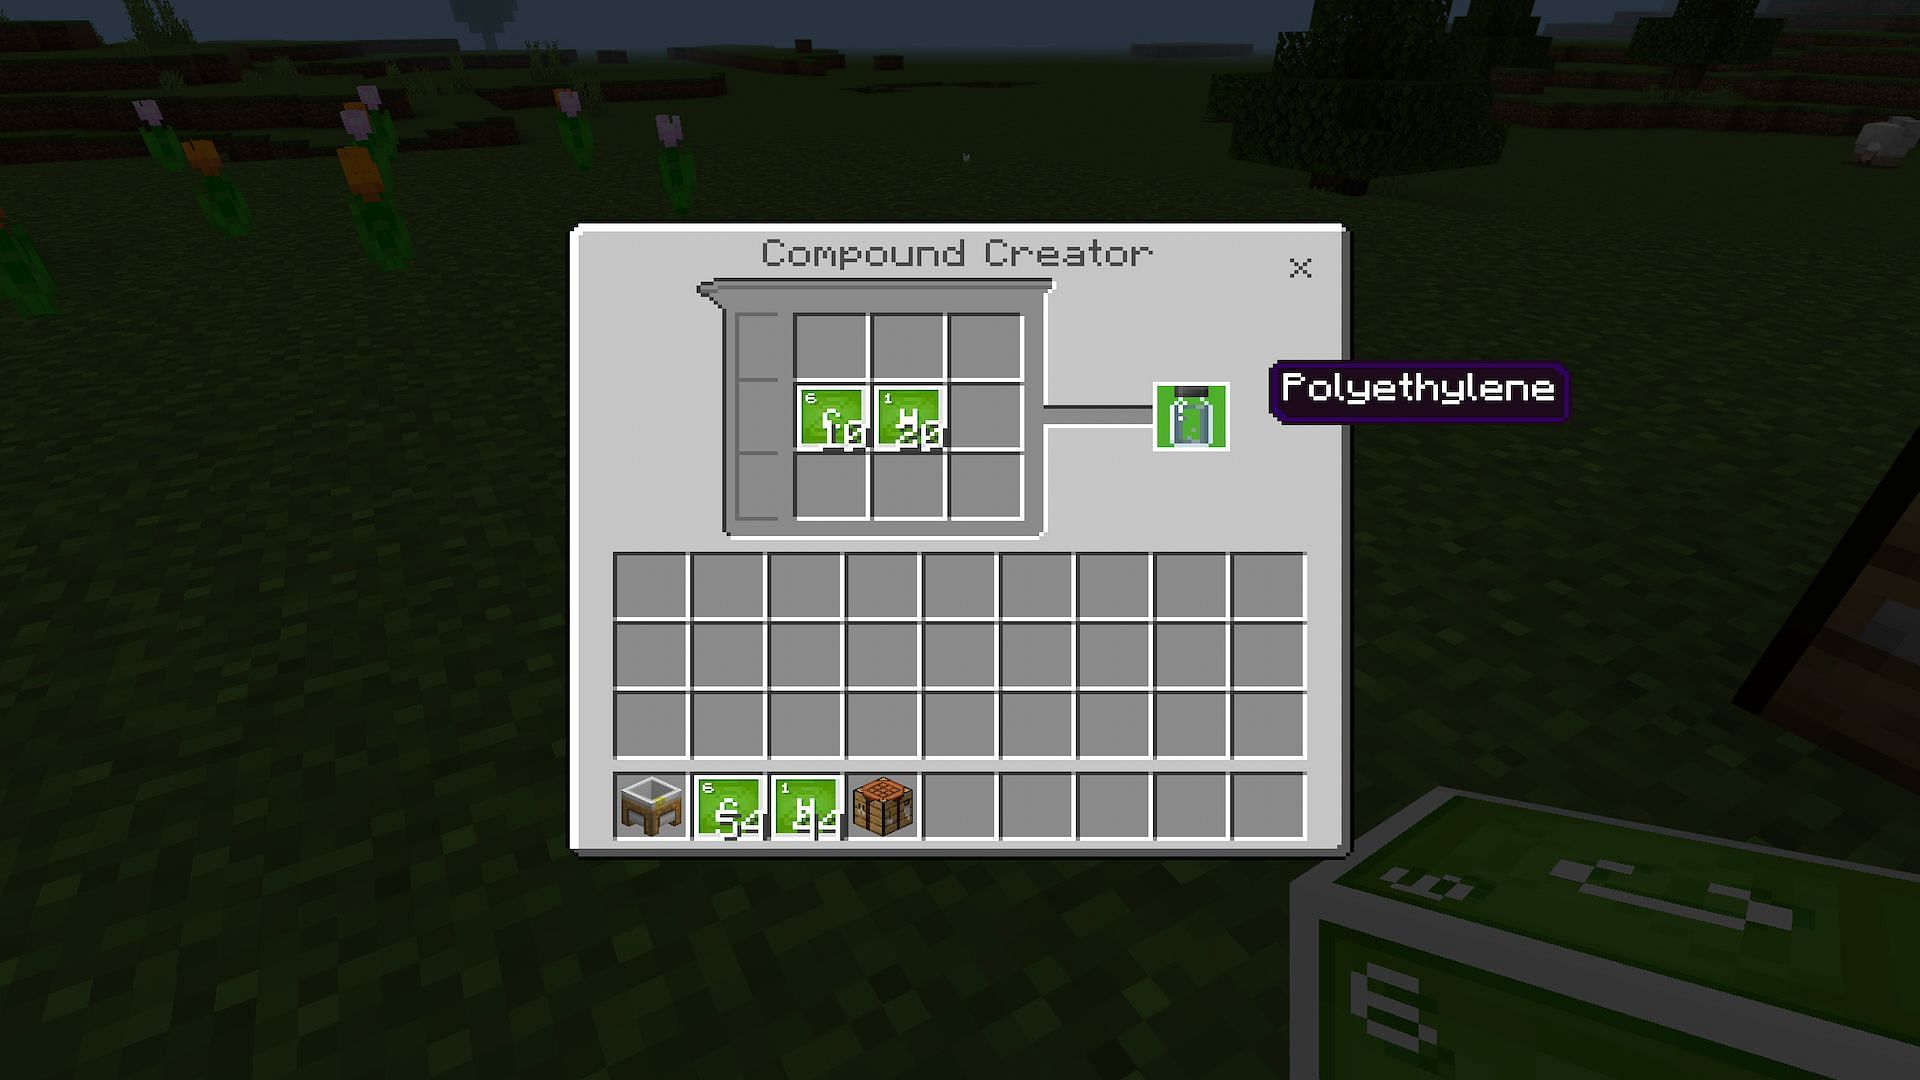 Players will first need to craft Polyethylene if they want to create a glowstick (Image via Minecraft)